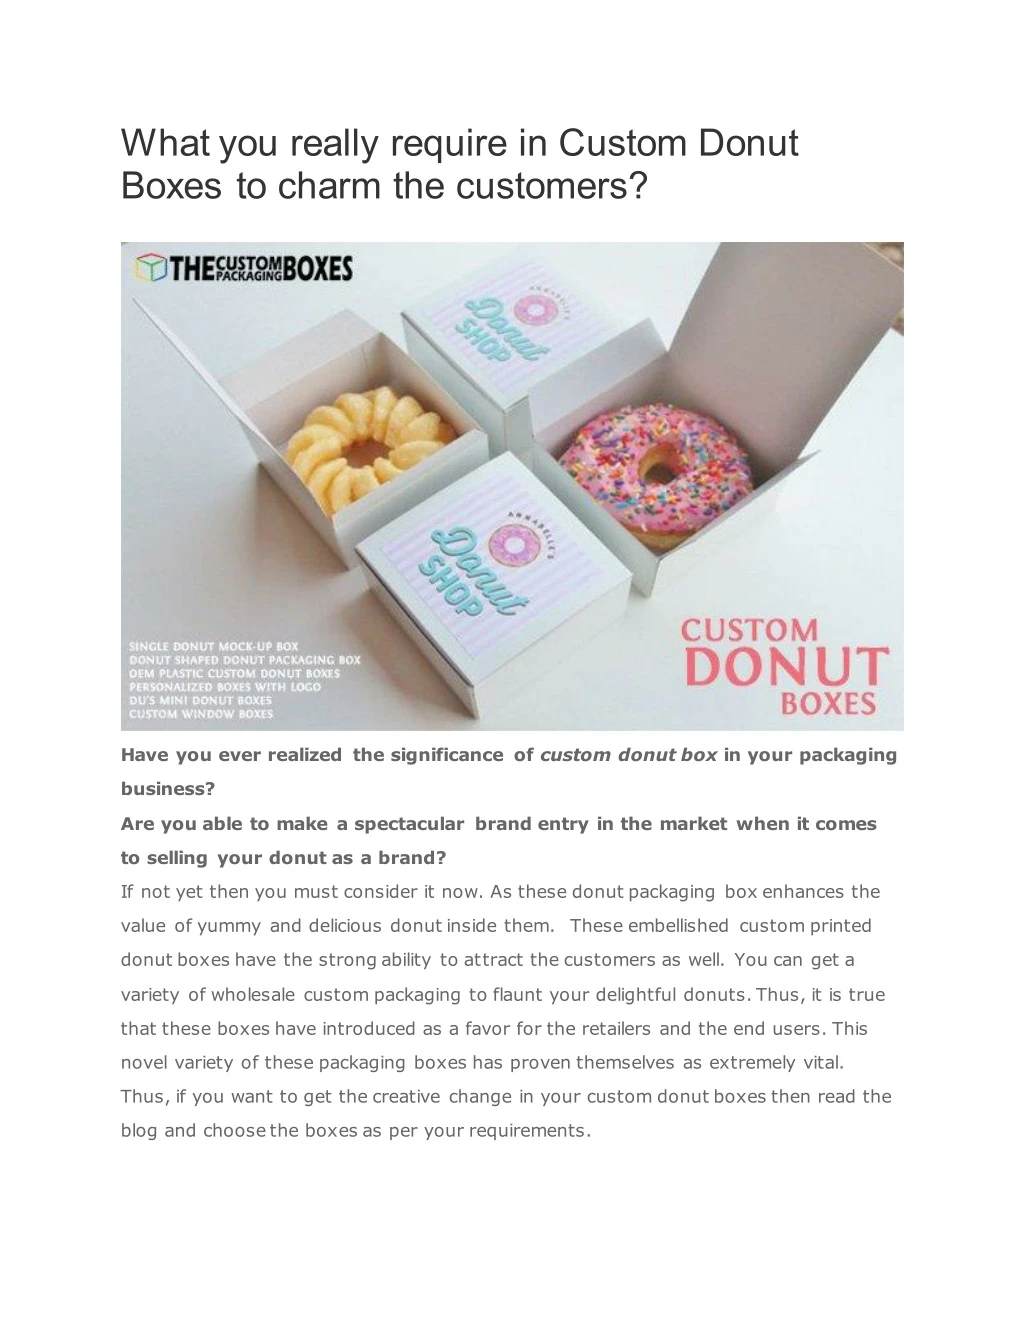 what you really require in custom donut boxes